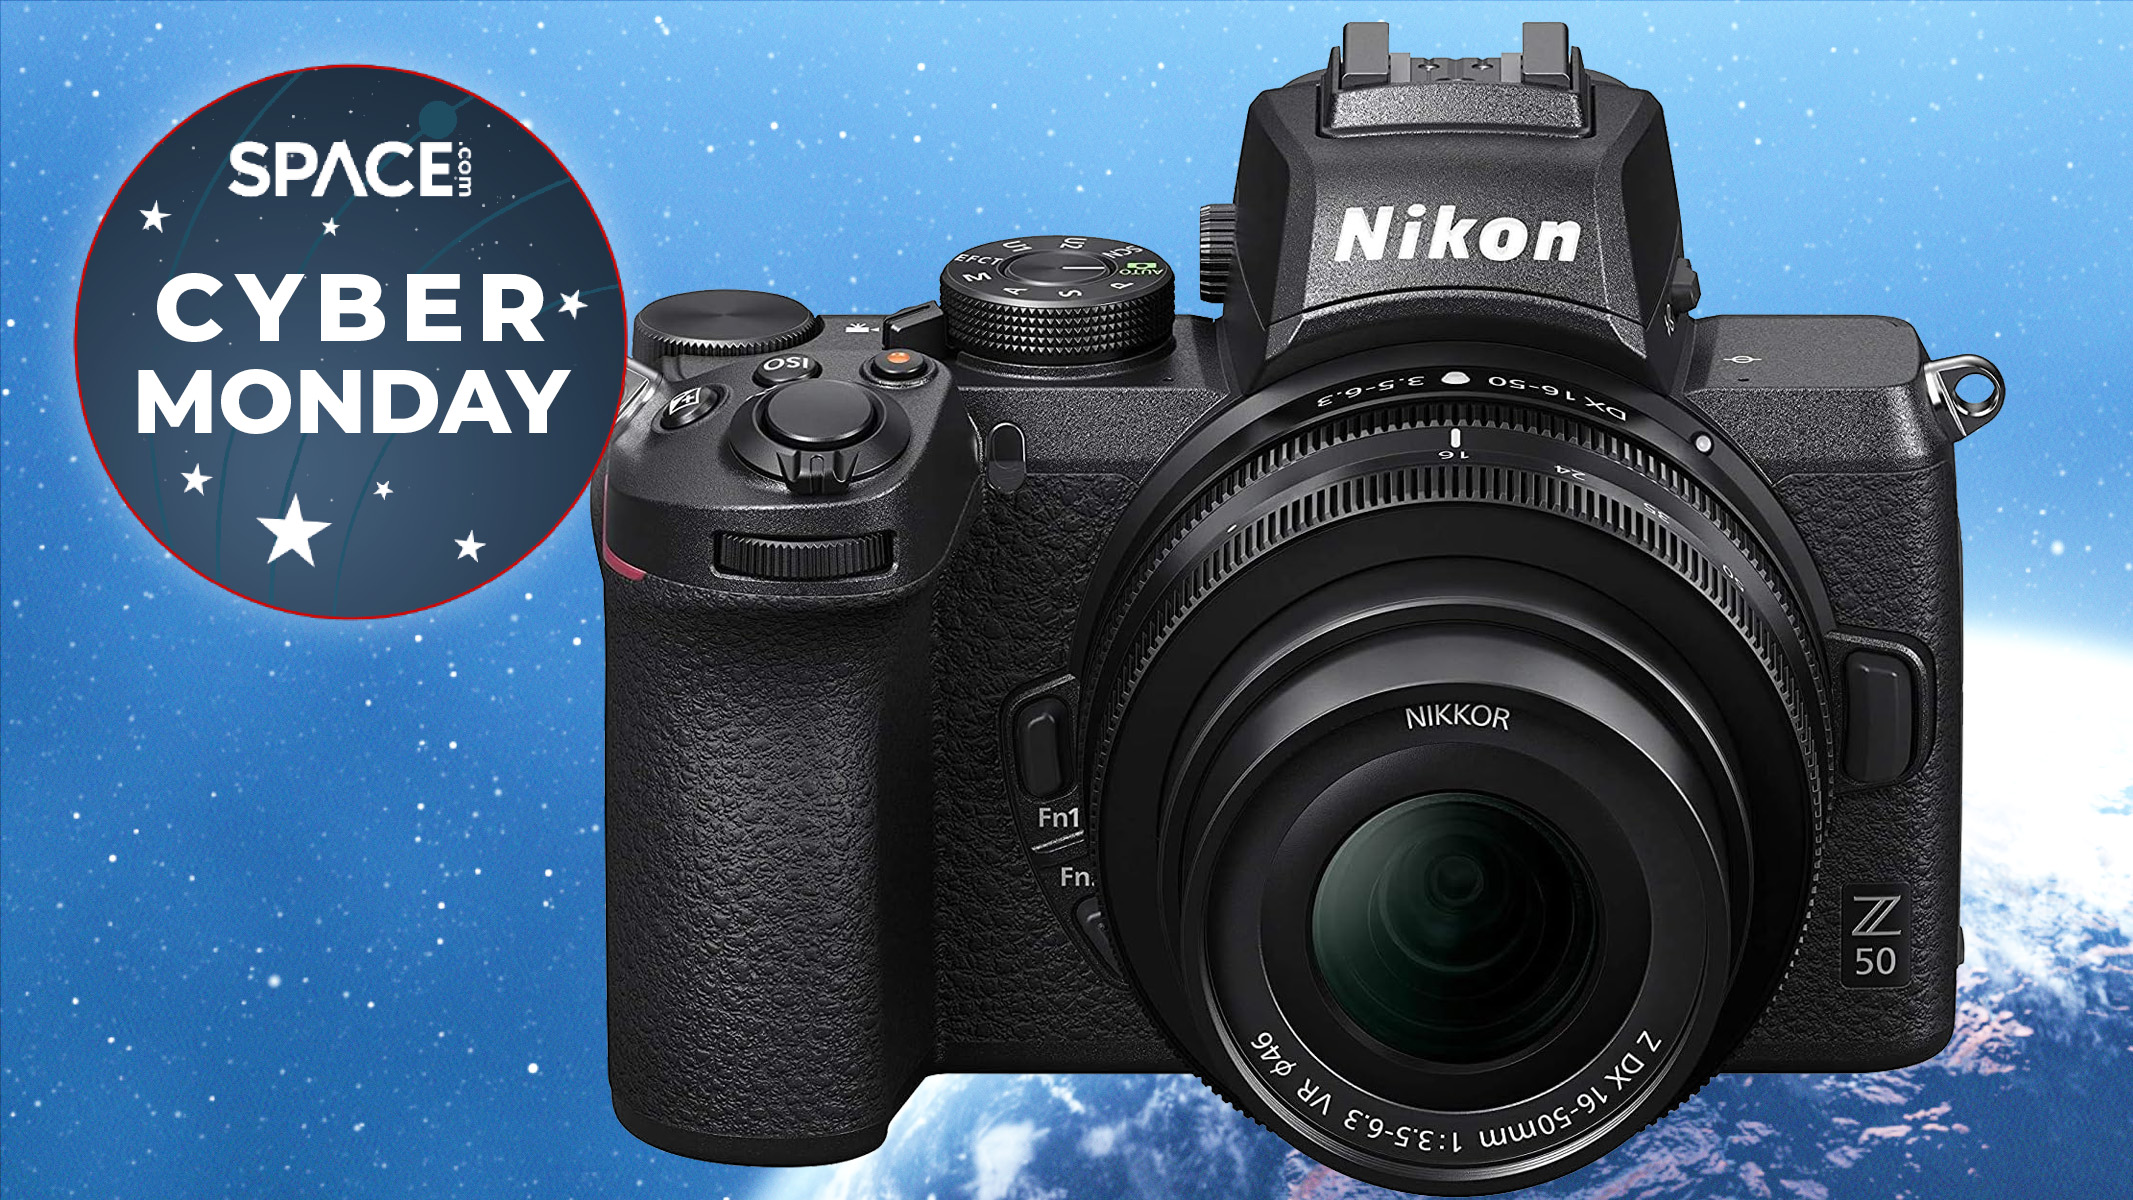 Save $100 on the Nikon Z50 mirrorless camera this Cyber Monday Space